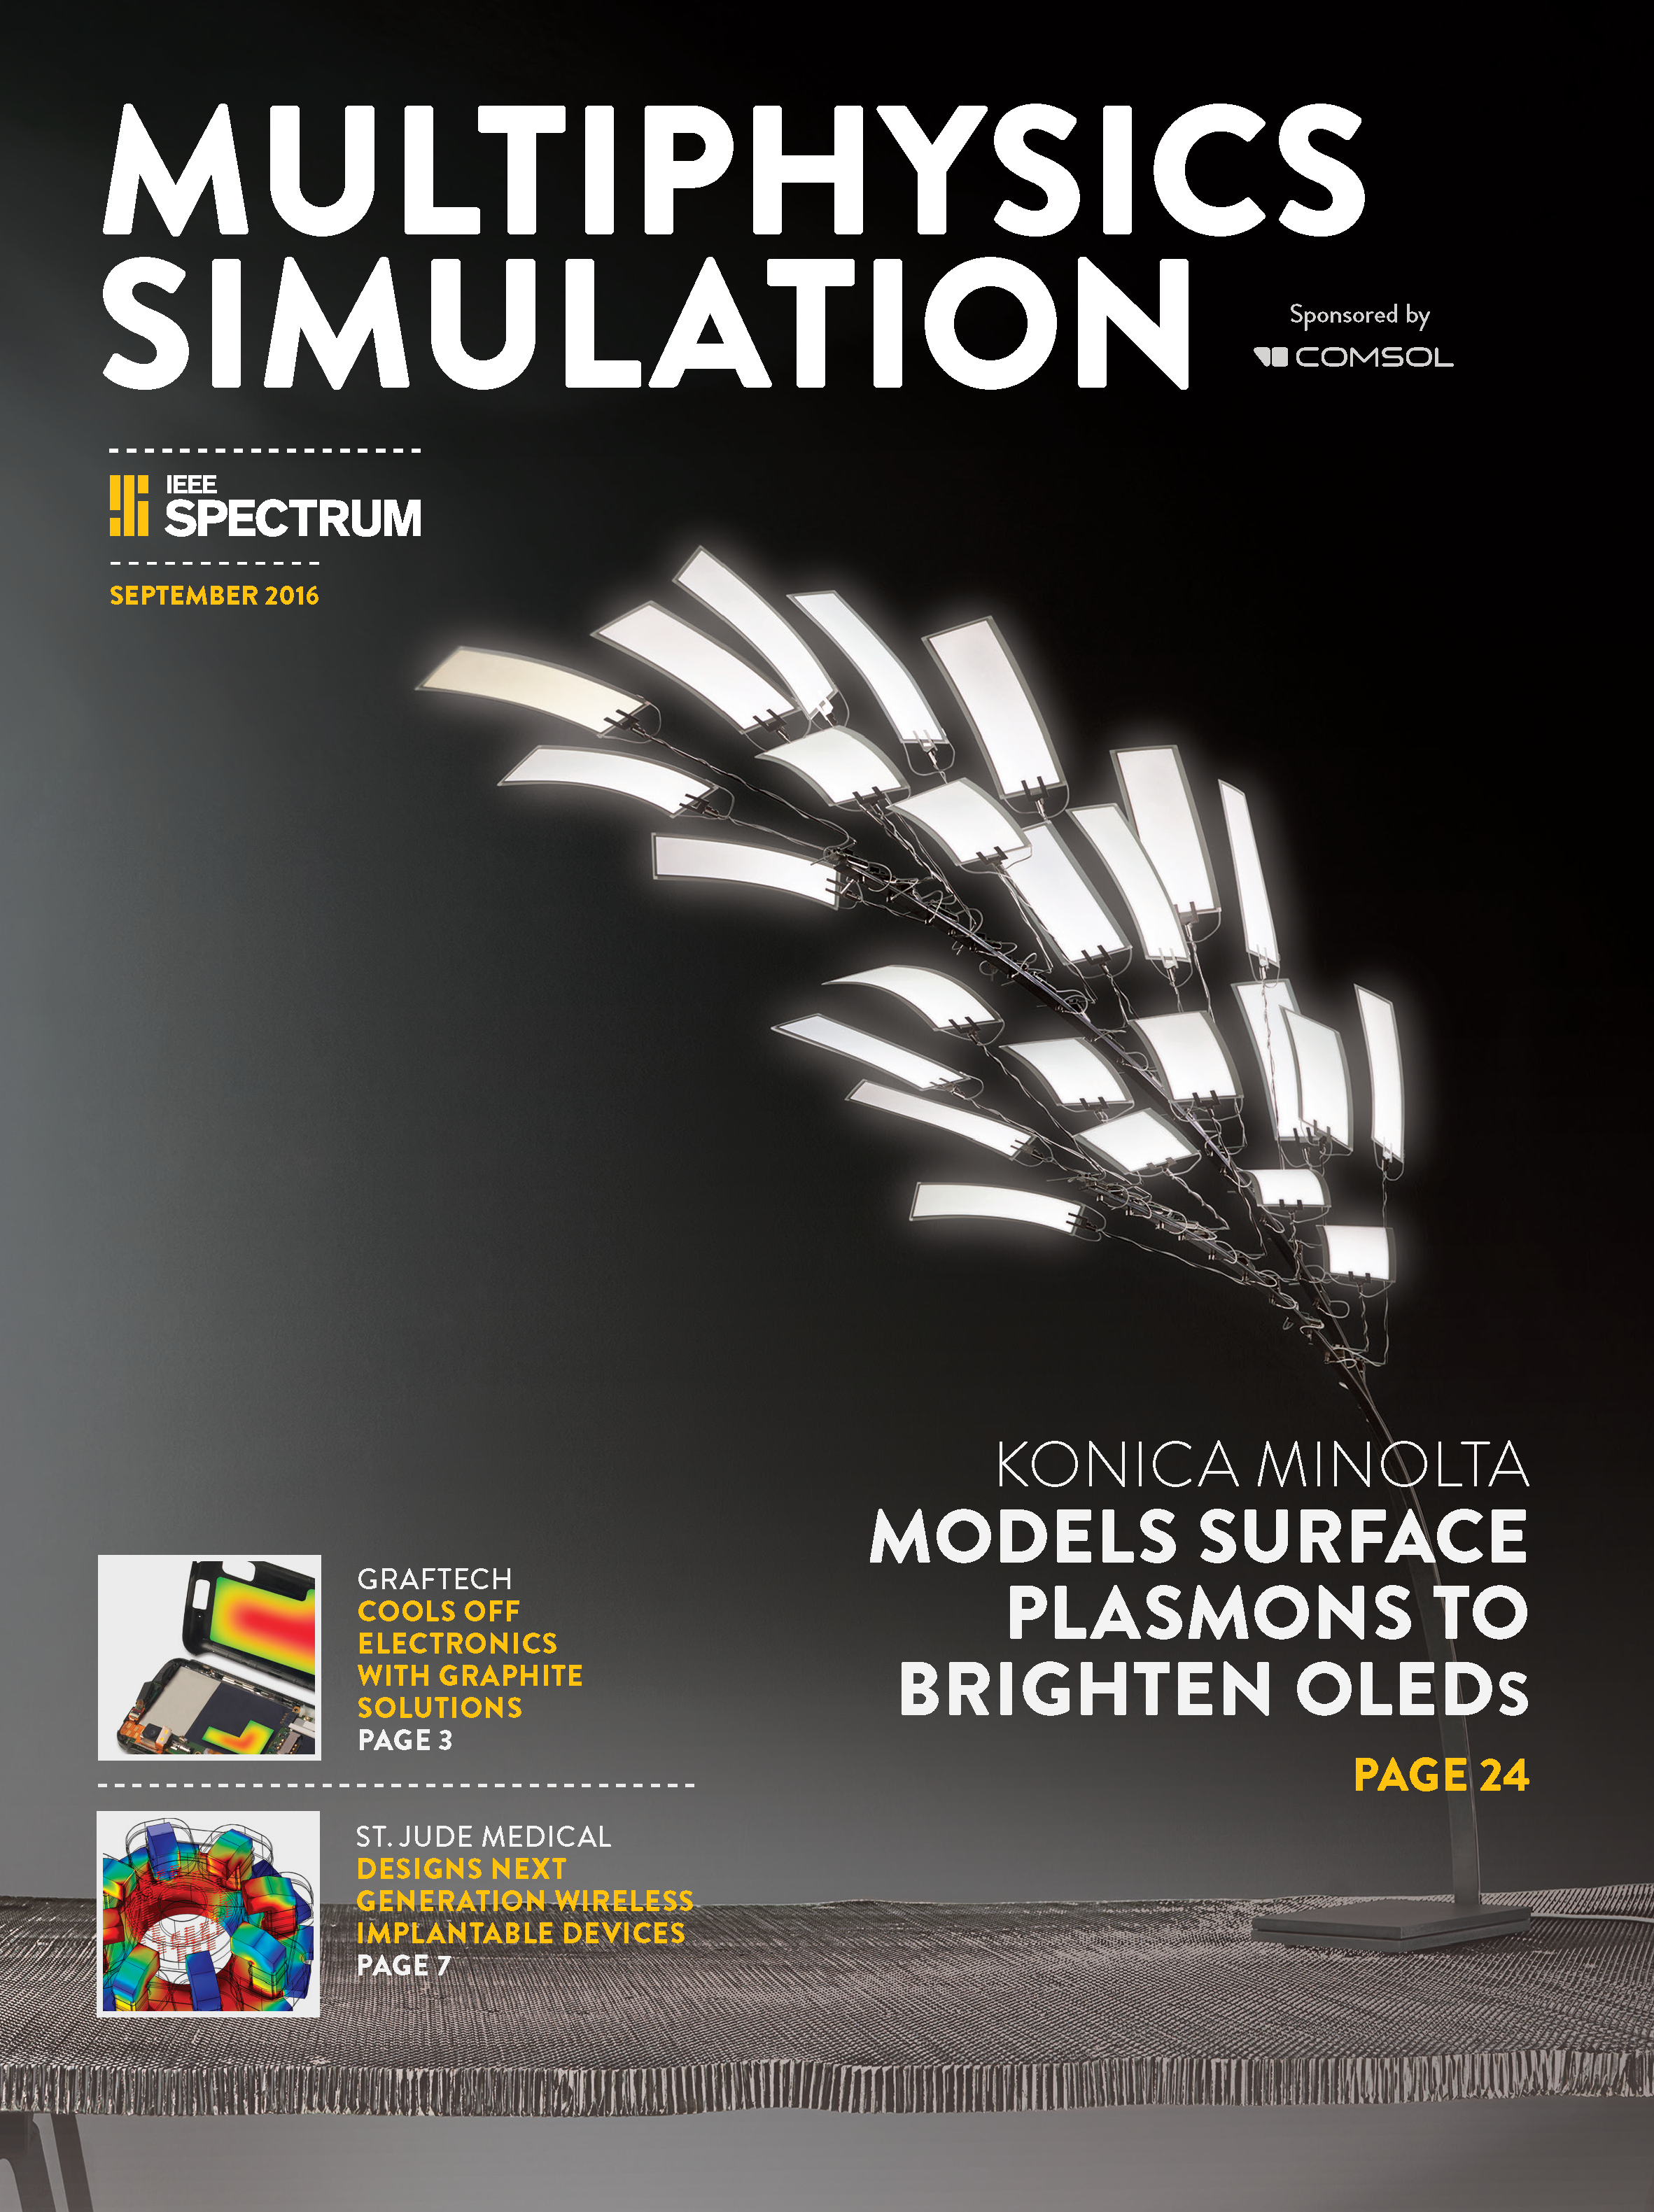 Explore how companies are expanding access to multiphysics simulation with custom simulation apps.